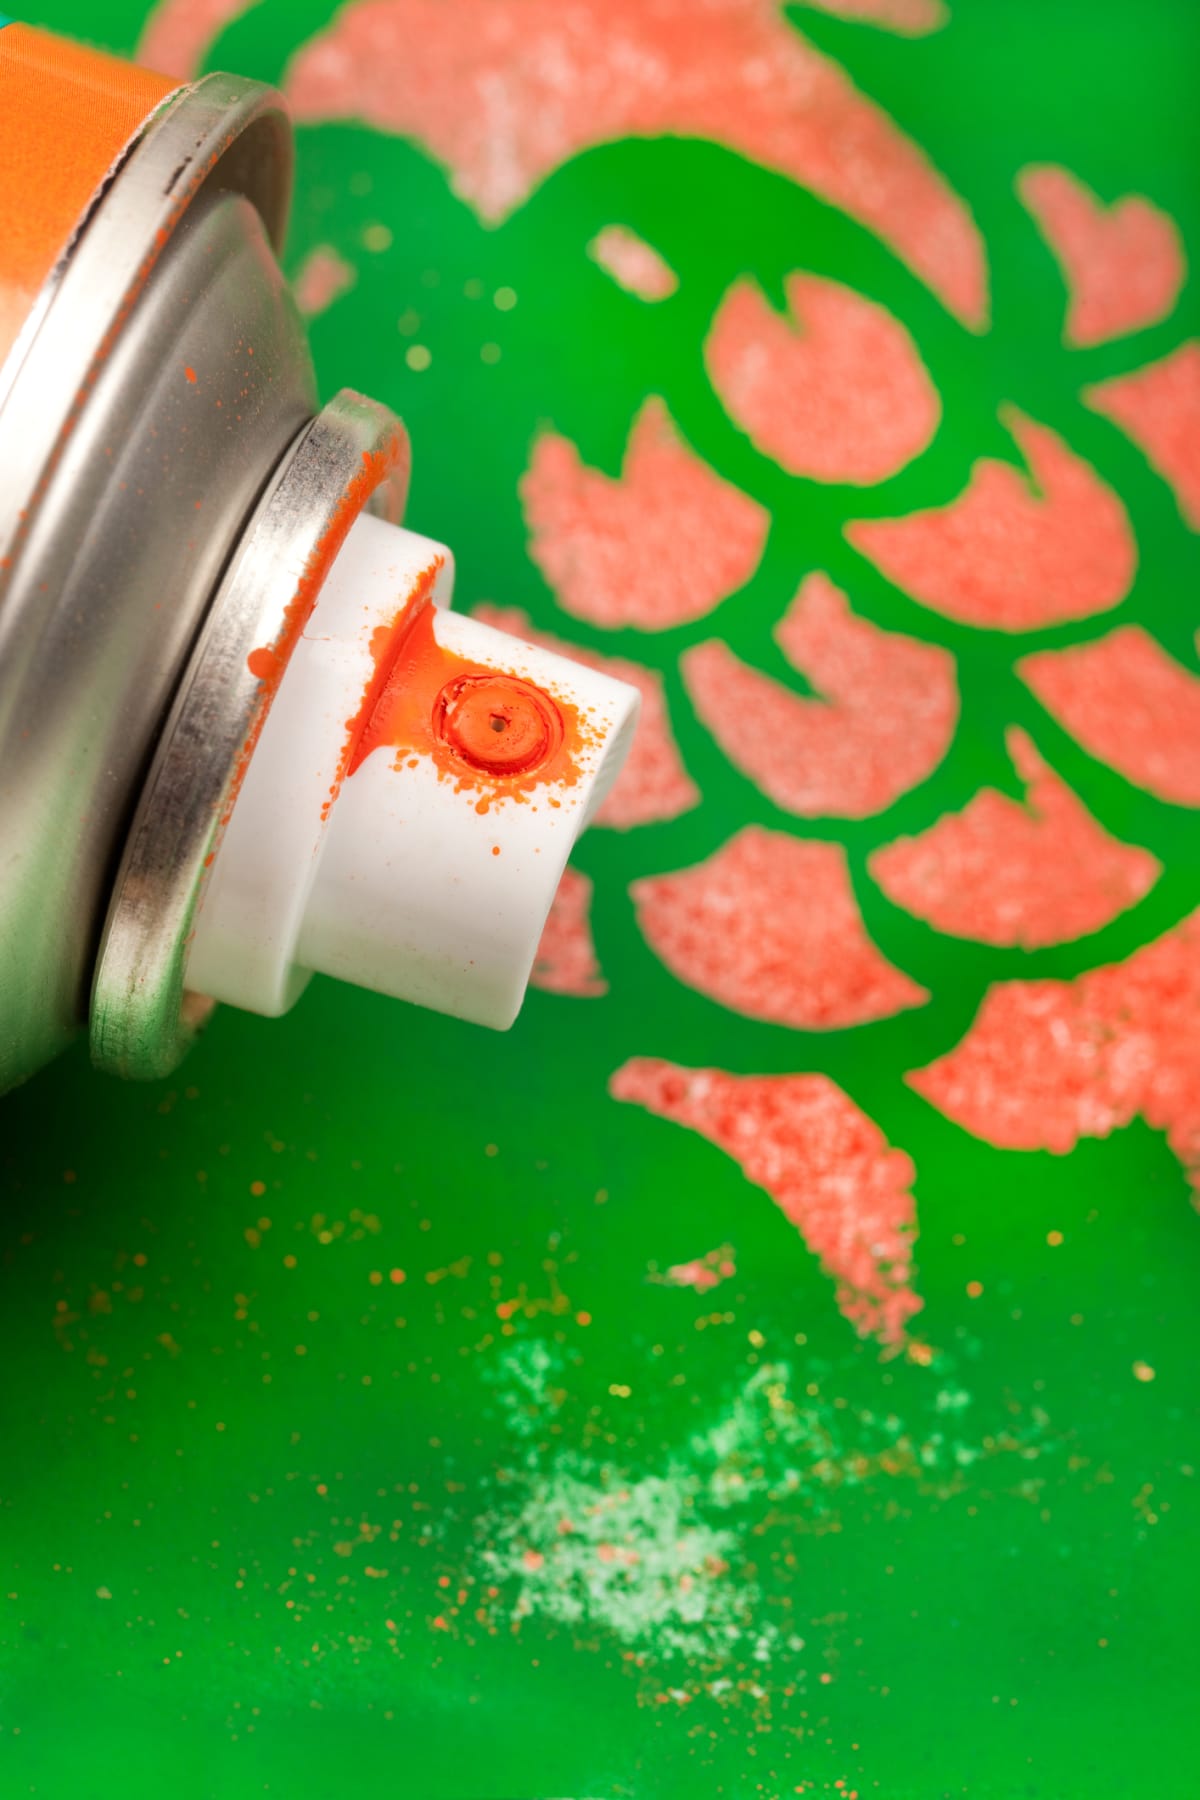 A spray paint can on a green and orange background